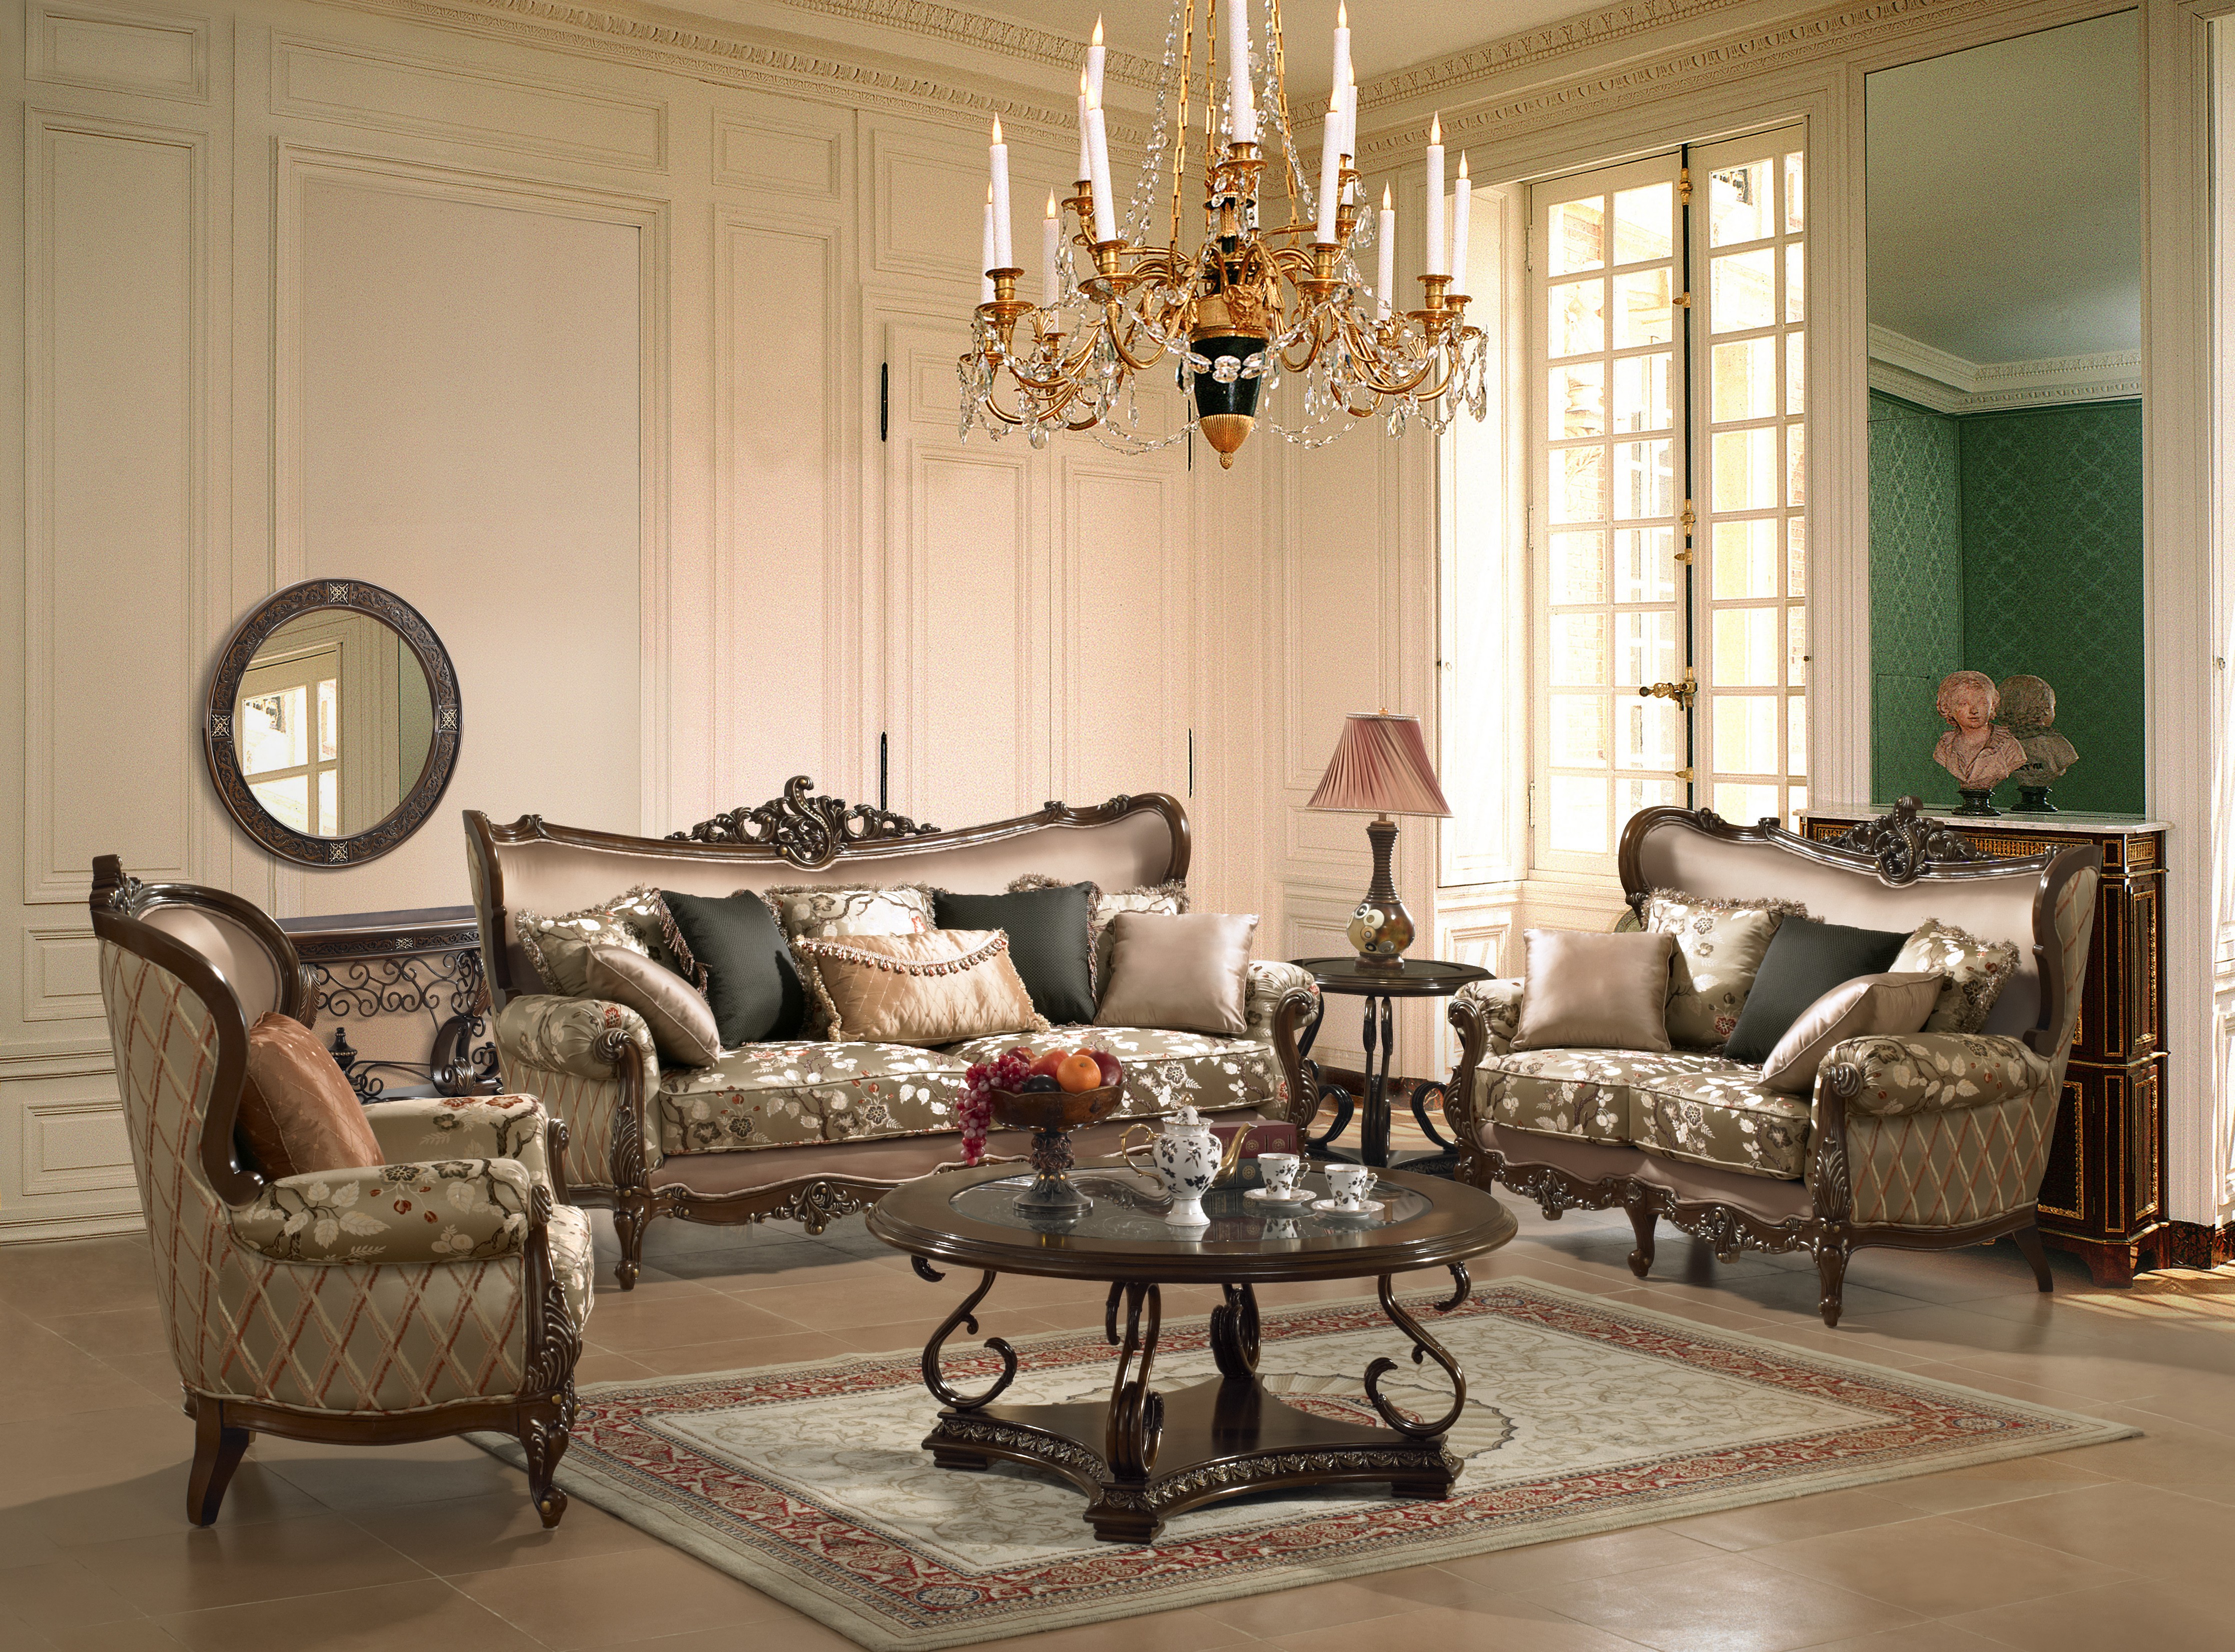 Home Decor Furniture: Transform Your Space With Elegant Style